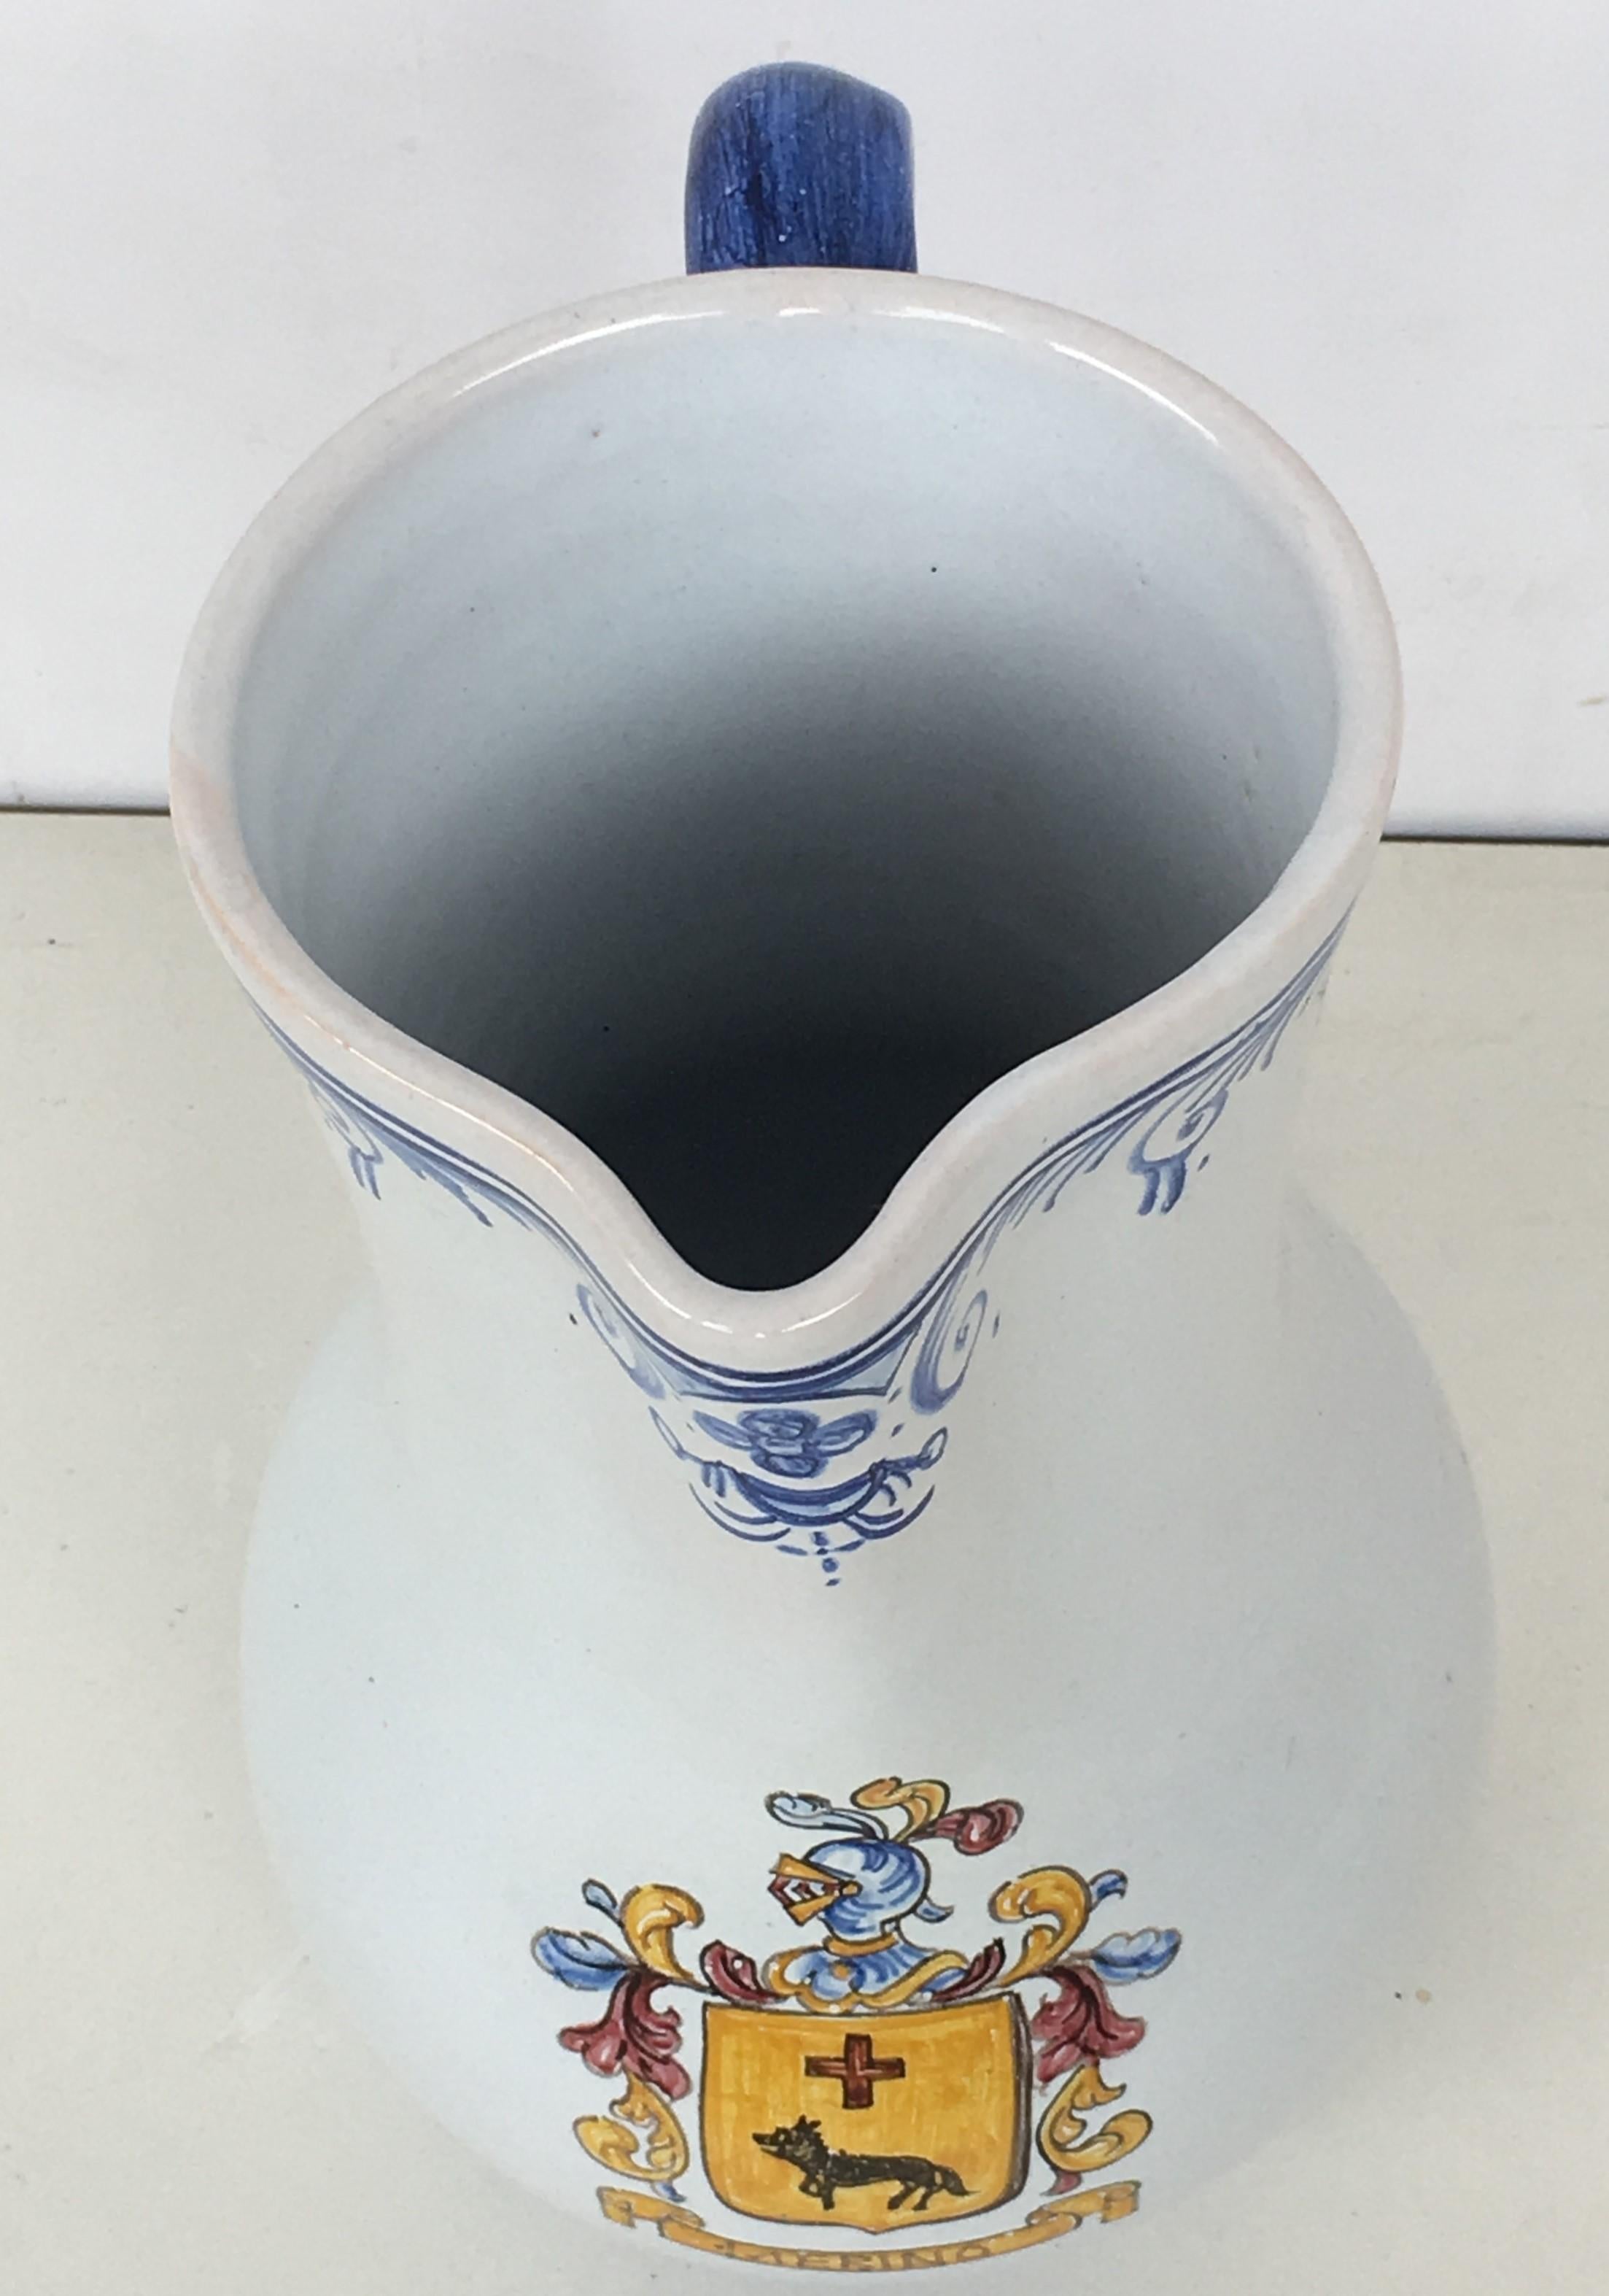 20th Century Glazed Earthenware Blue and White Painted Pitcher, Signed Talavera In Good Condition For Sale In Miami, FL